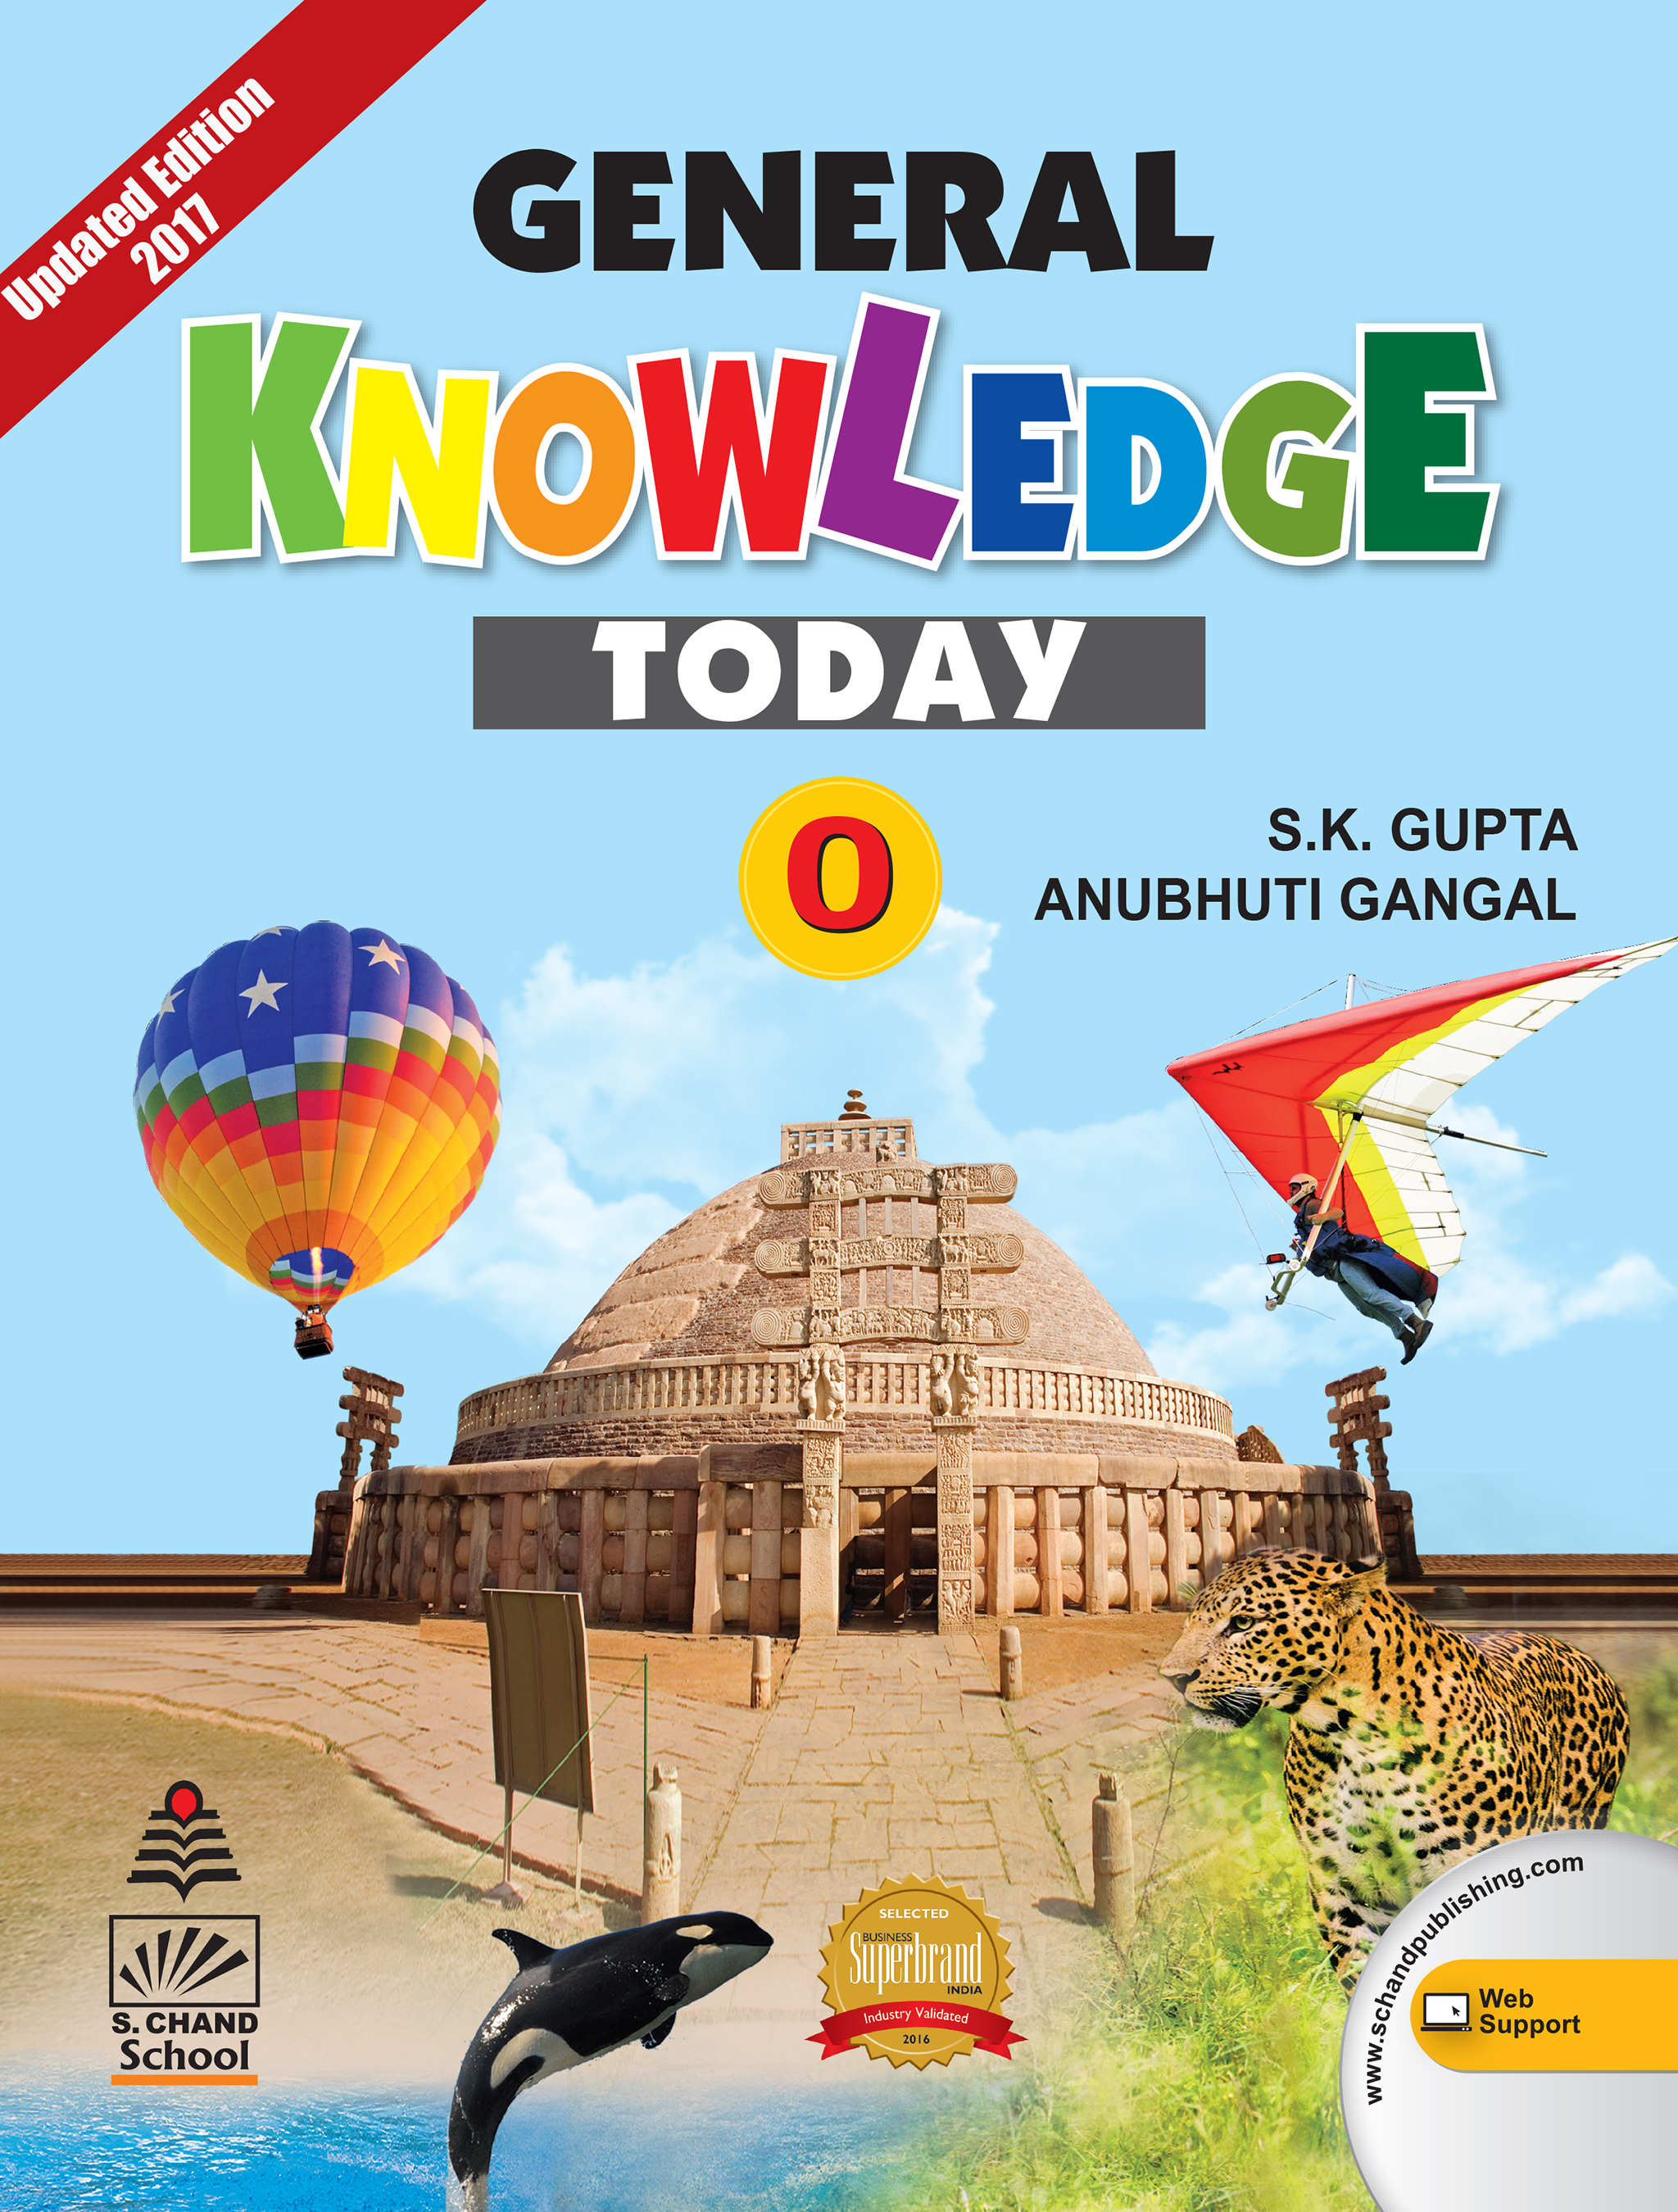 General Knowledge Today (Updated Edition) Book0 By S.K. Gupta